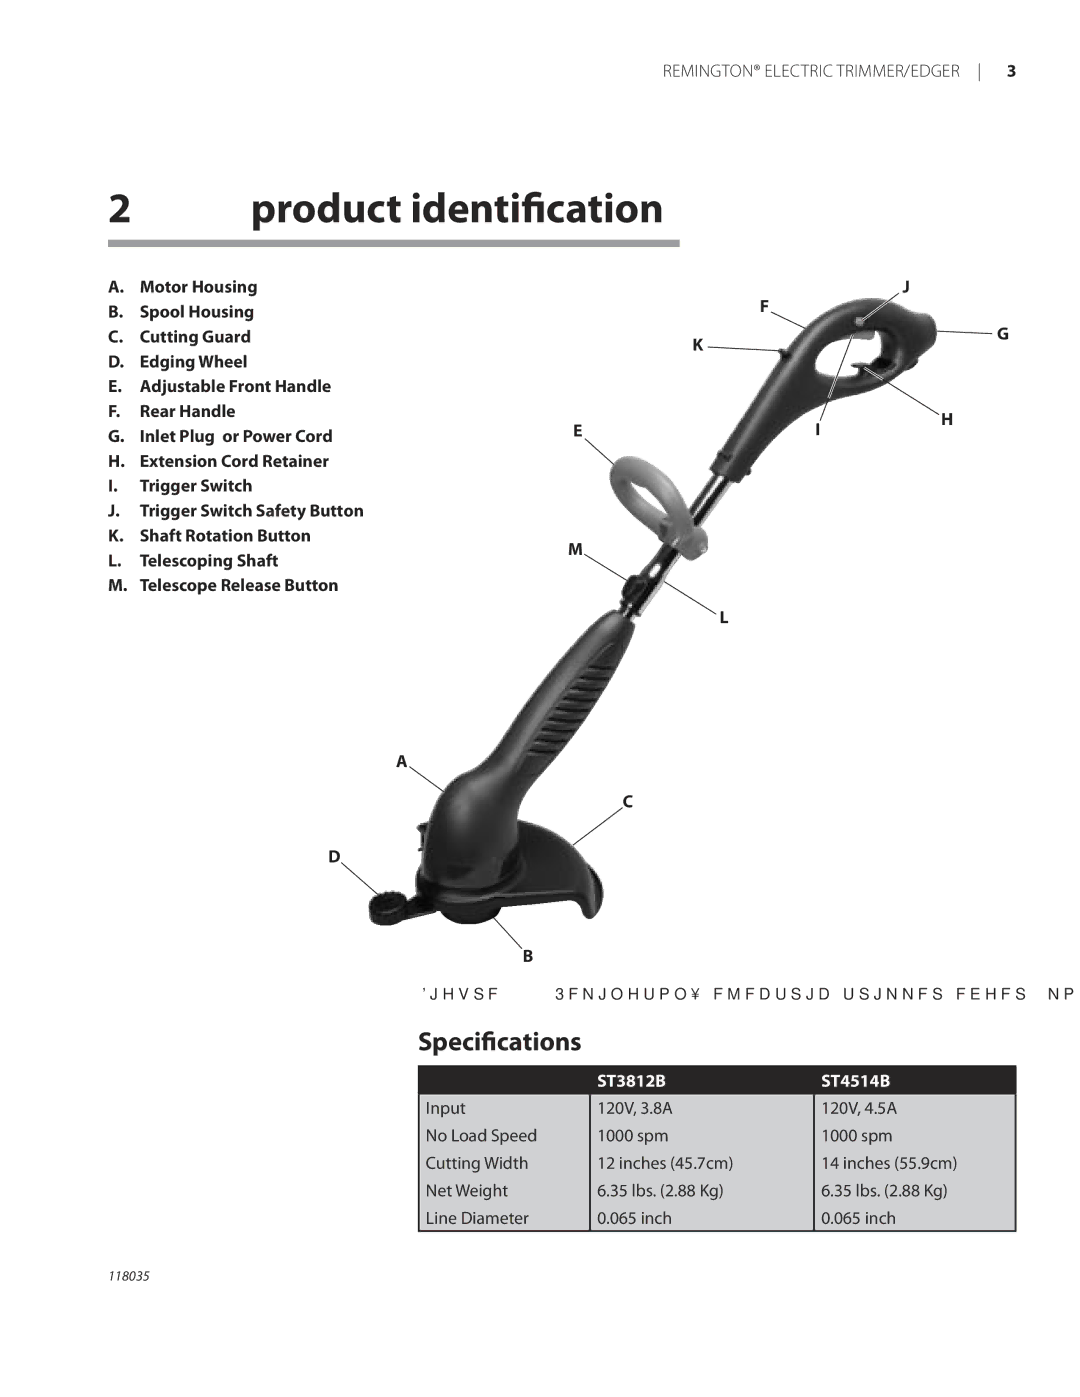 Remington ST3812B, ST4514B owner manual Product identiﬁcation, Speciﬁcations 